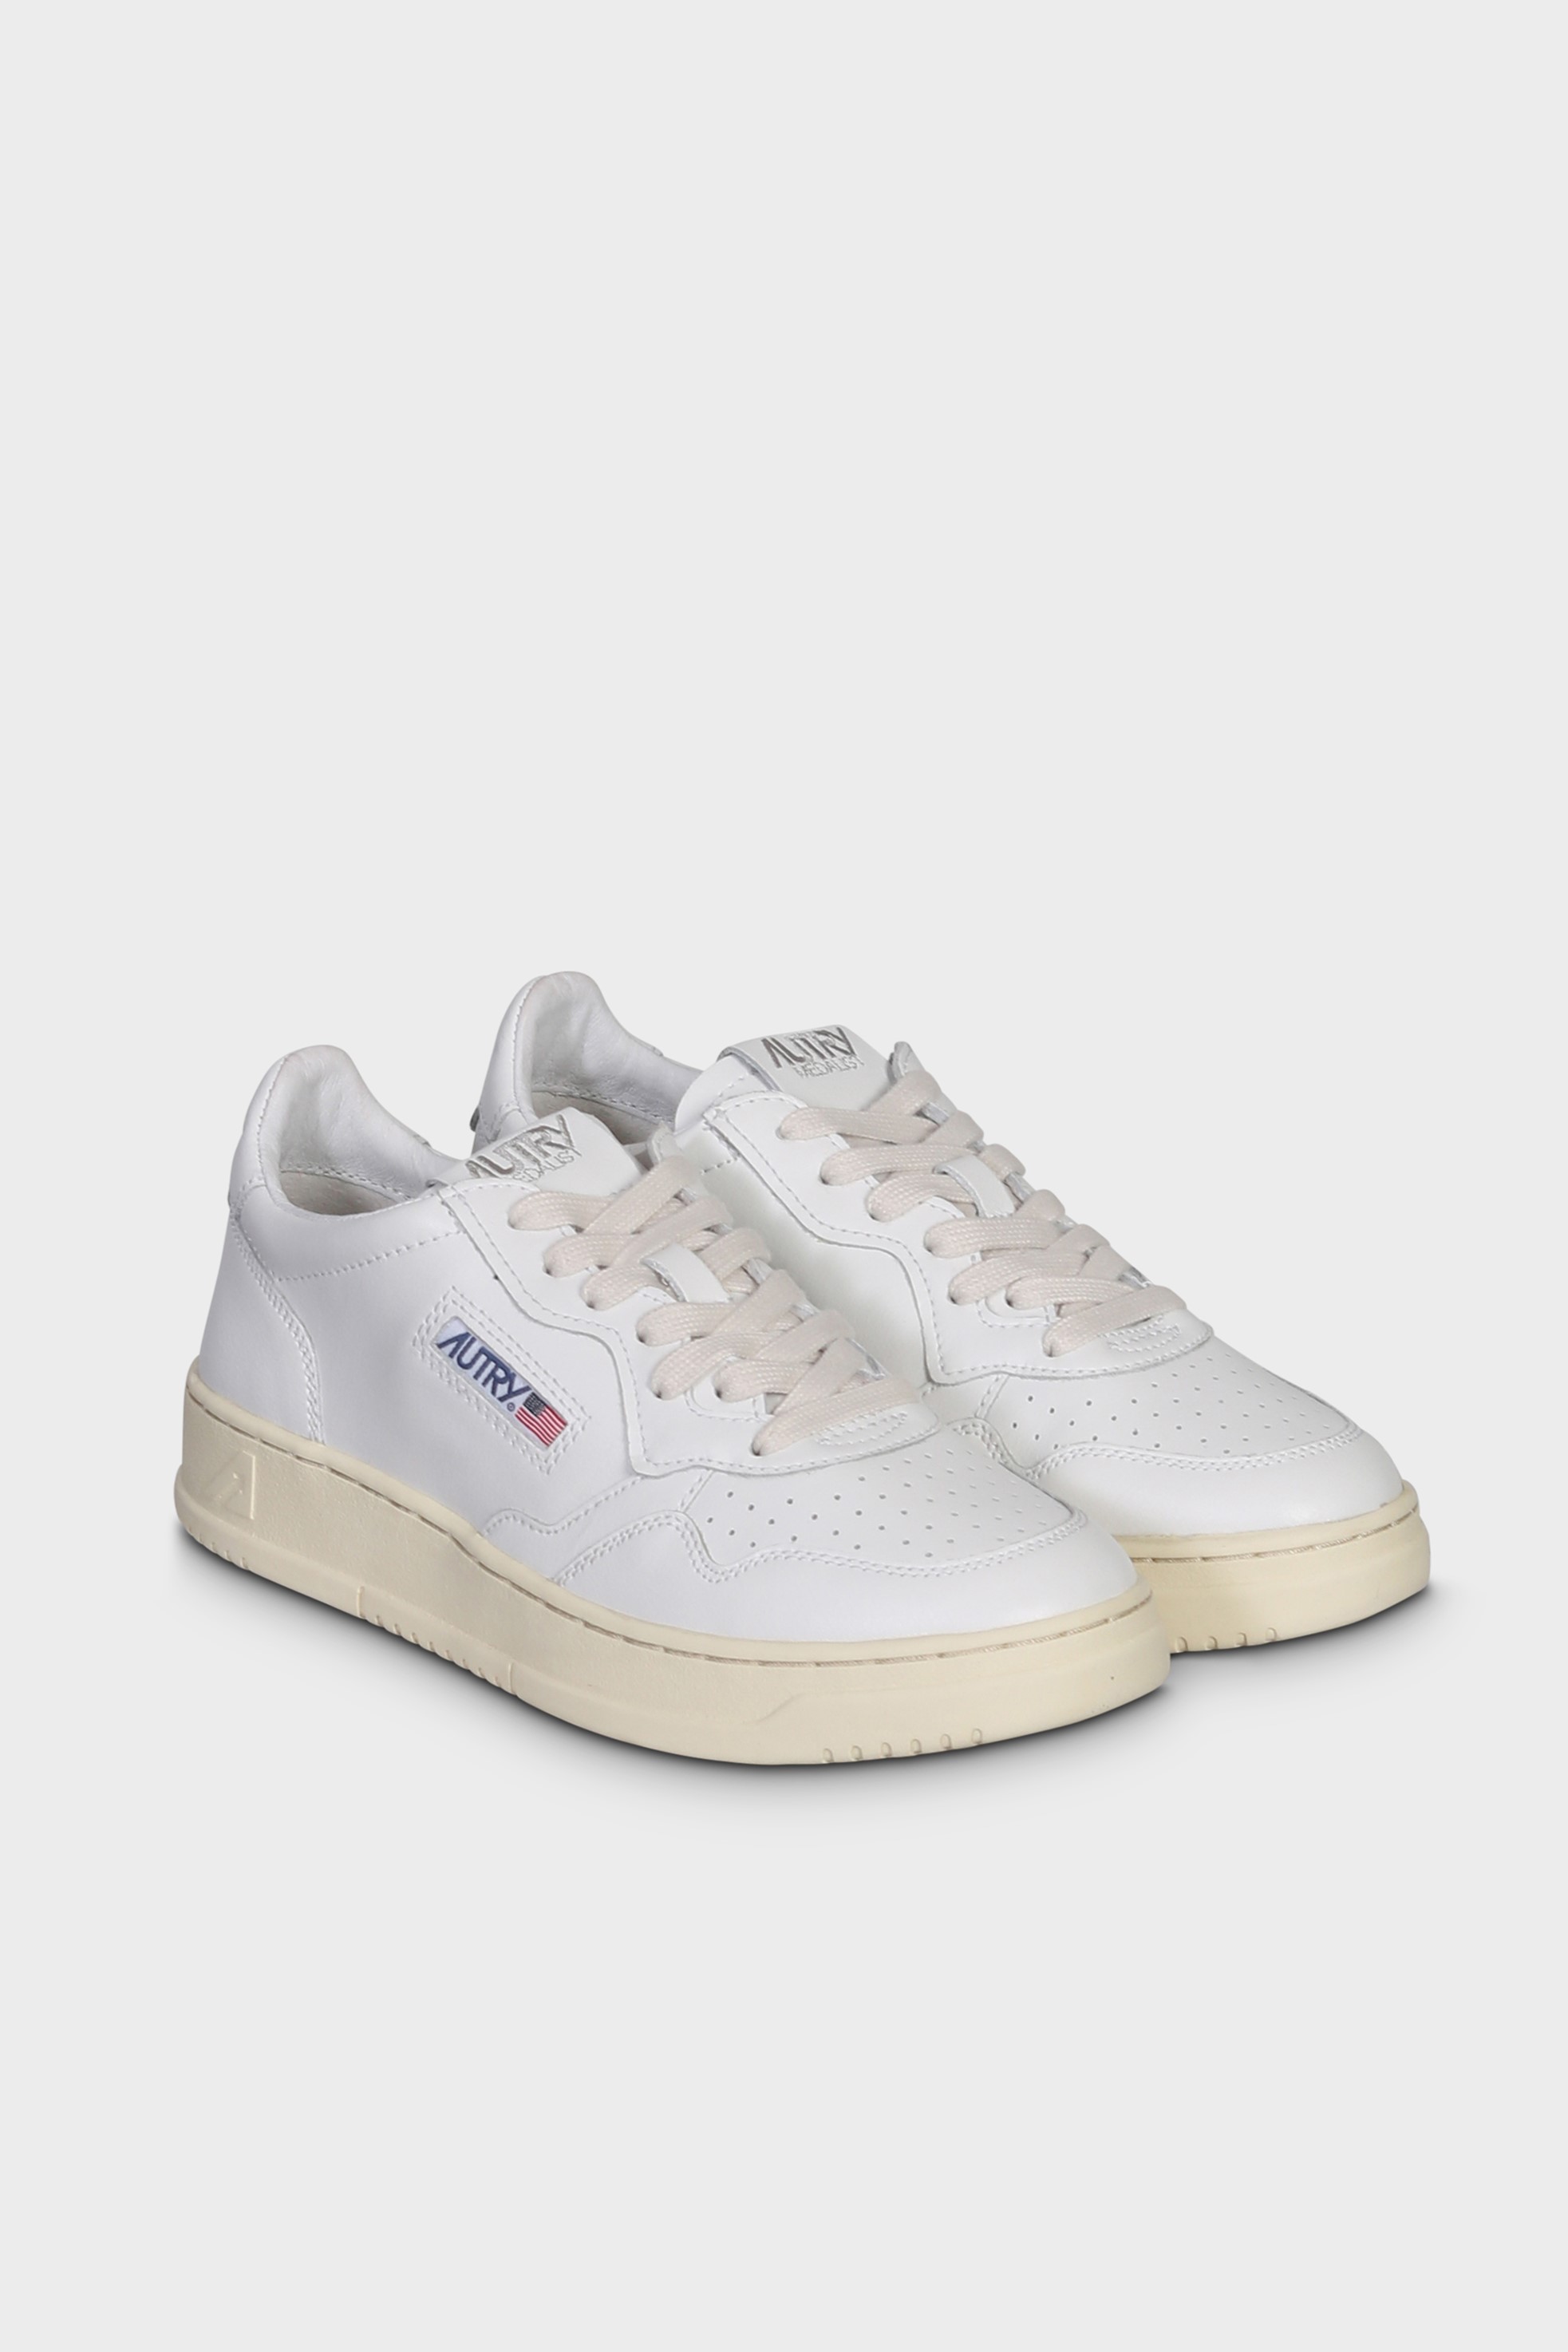 AUTRY ACTION SHOES Medalist Low Sneaker White/White 43